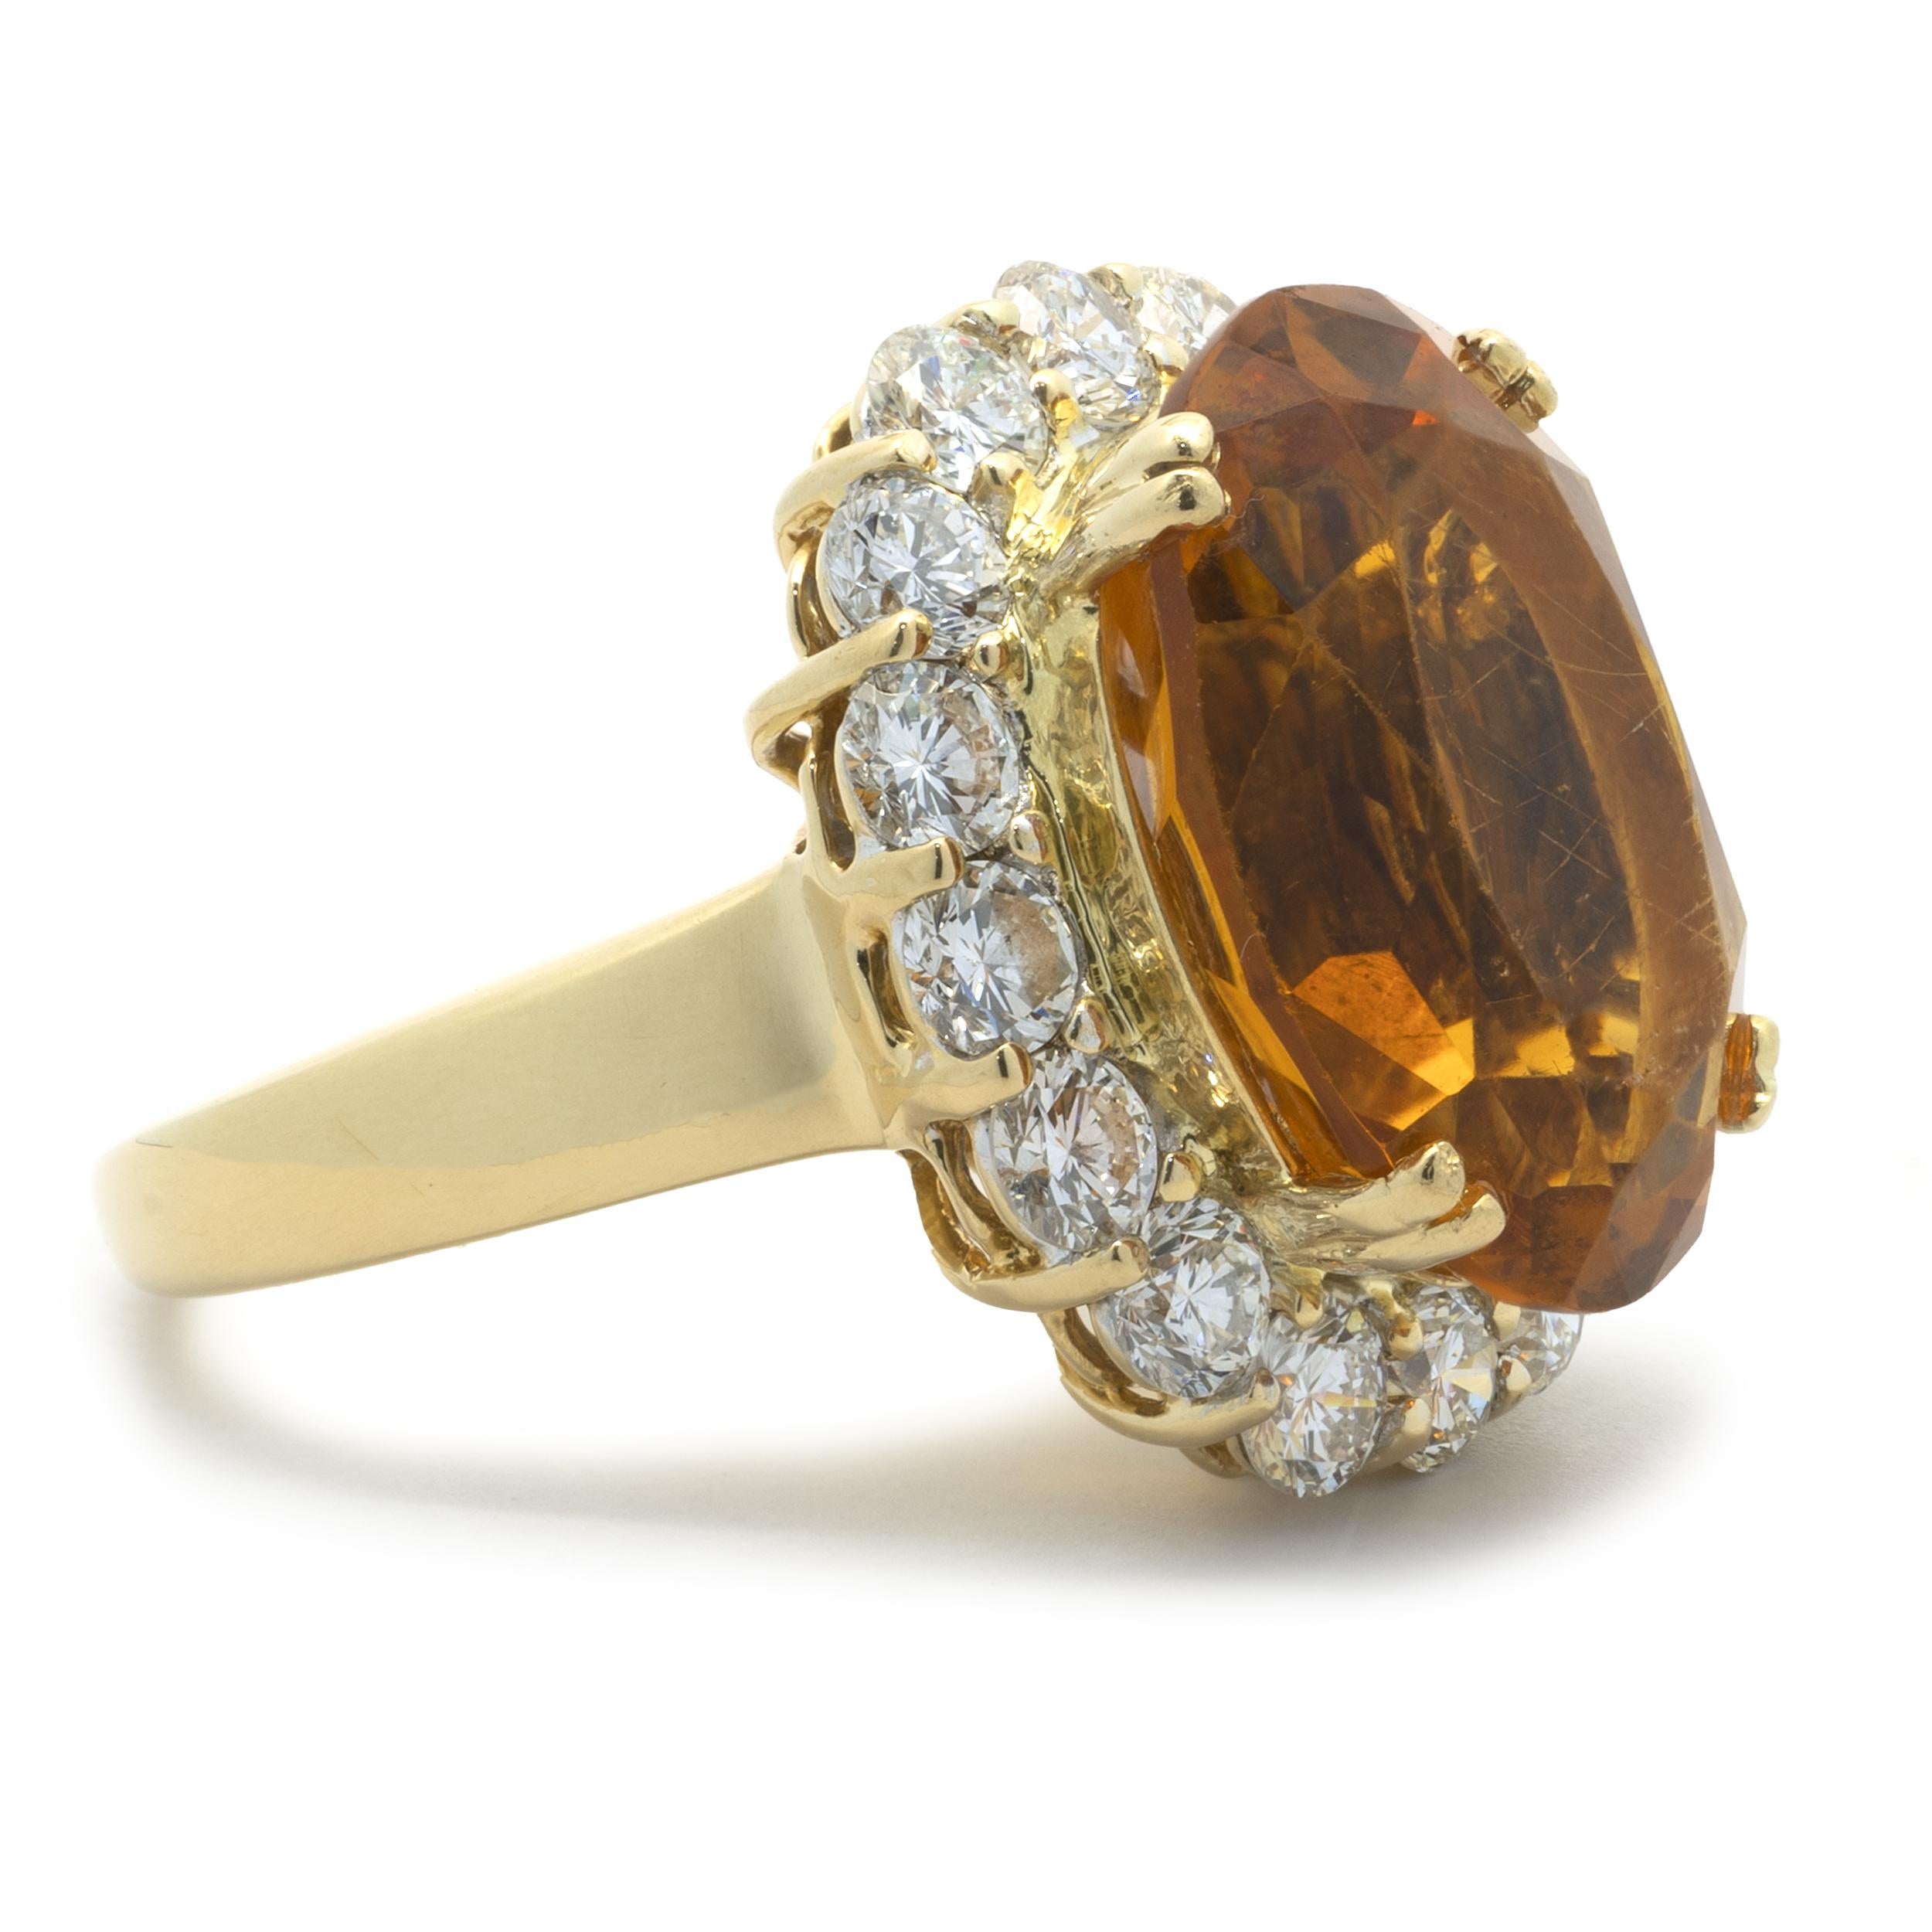 Designer: custom design
Material: 18K yellow gold
Diamond: 16 round brilliant cut = 1.12cttw
Color: G
Clarity: SI1
Citrine: 1 oval cut = 9.78ct
Ring size: 6 (please allow two additional shipping days for sizing requests) 
Dimension: ring top